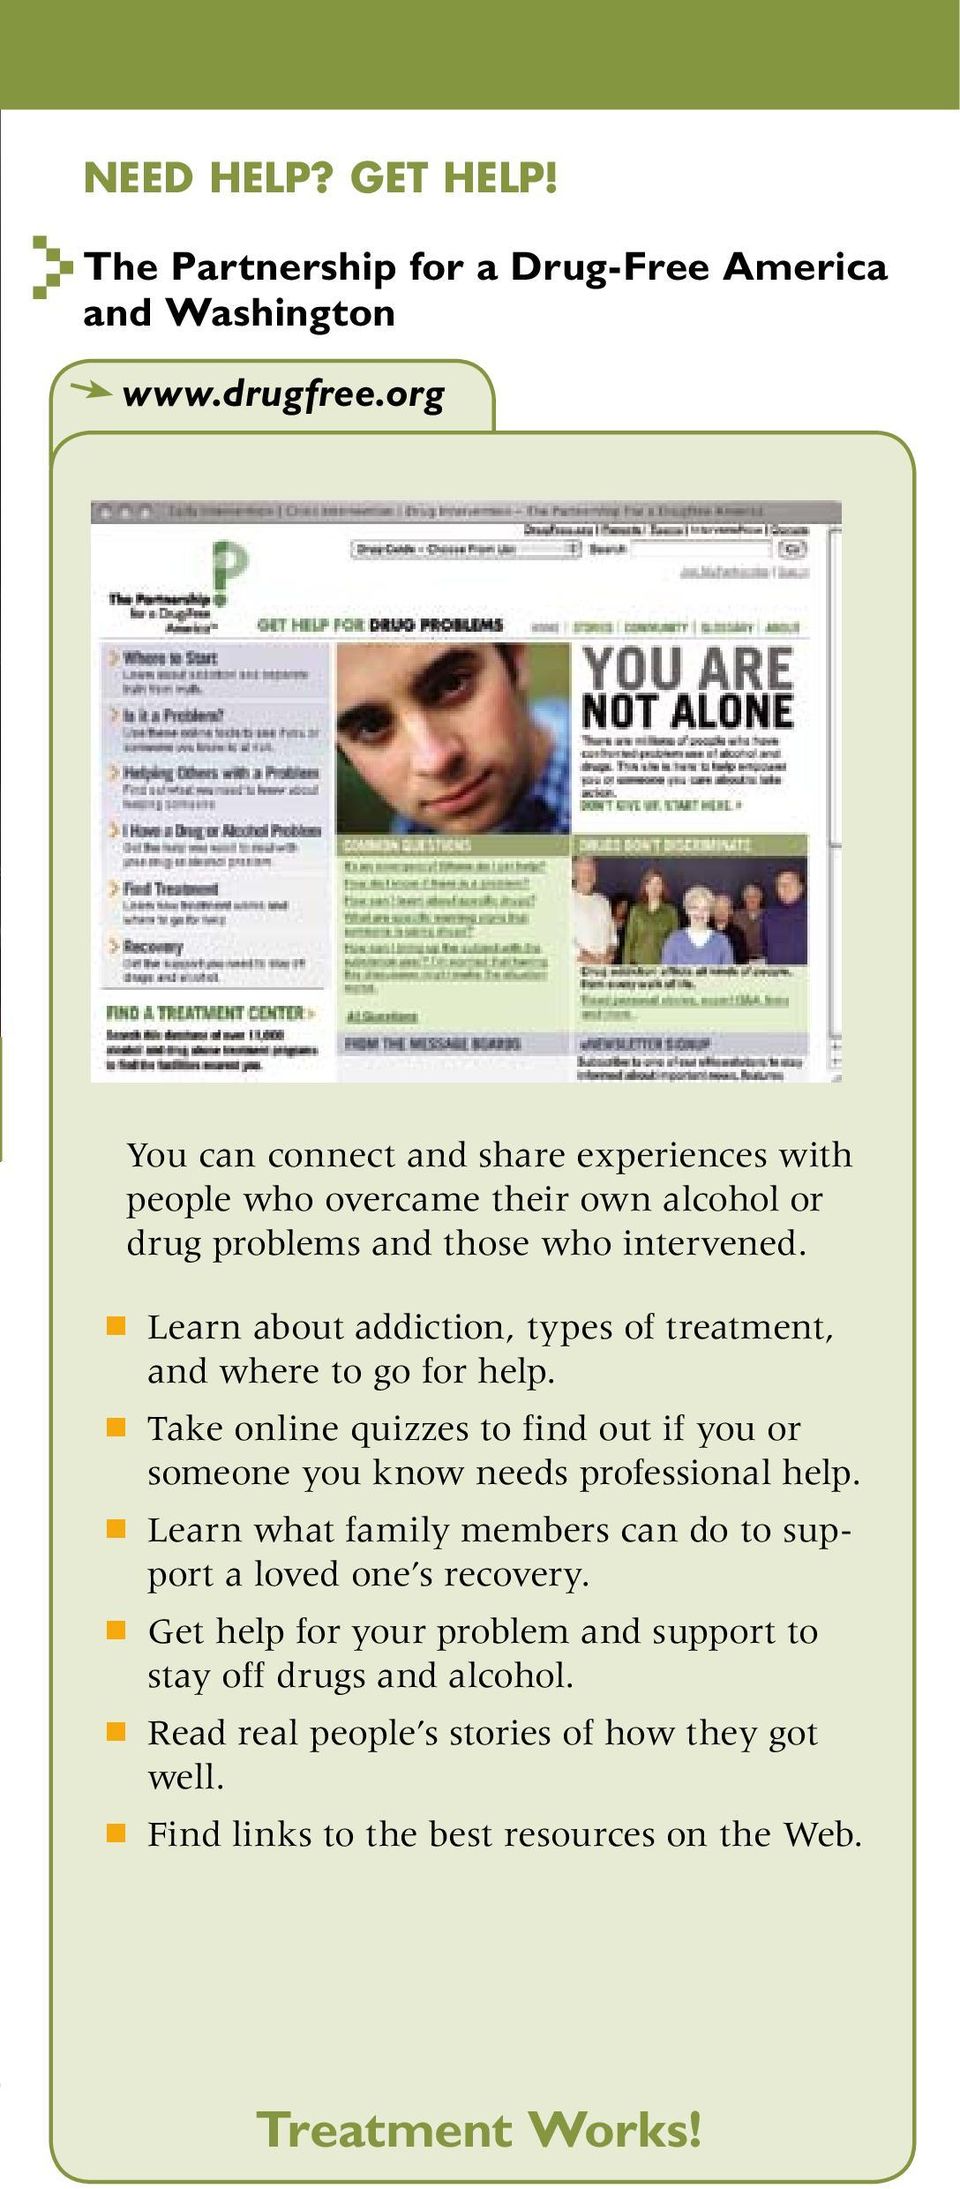 Learn about addiction, types of treatment, and where to go for help. Take online quizzes to find out if you or someone you know needs professional help.